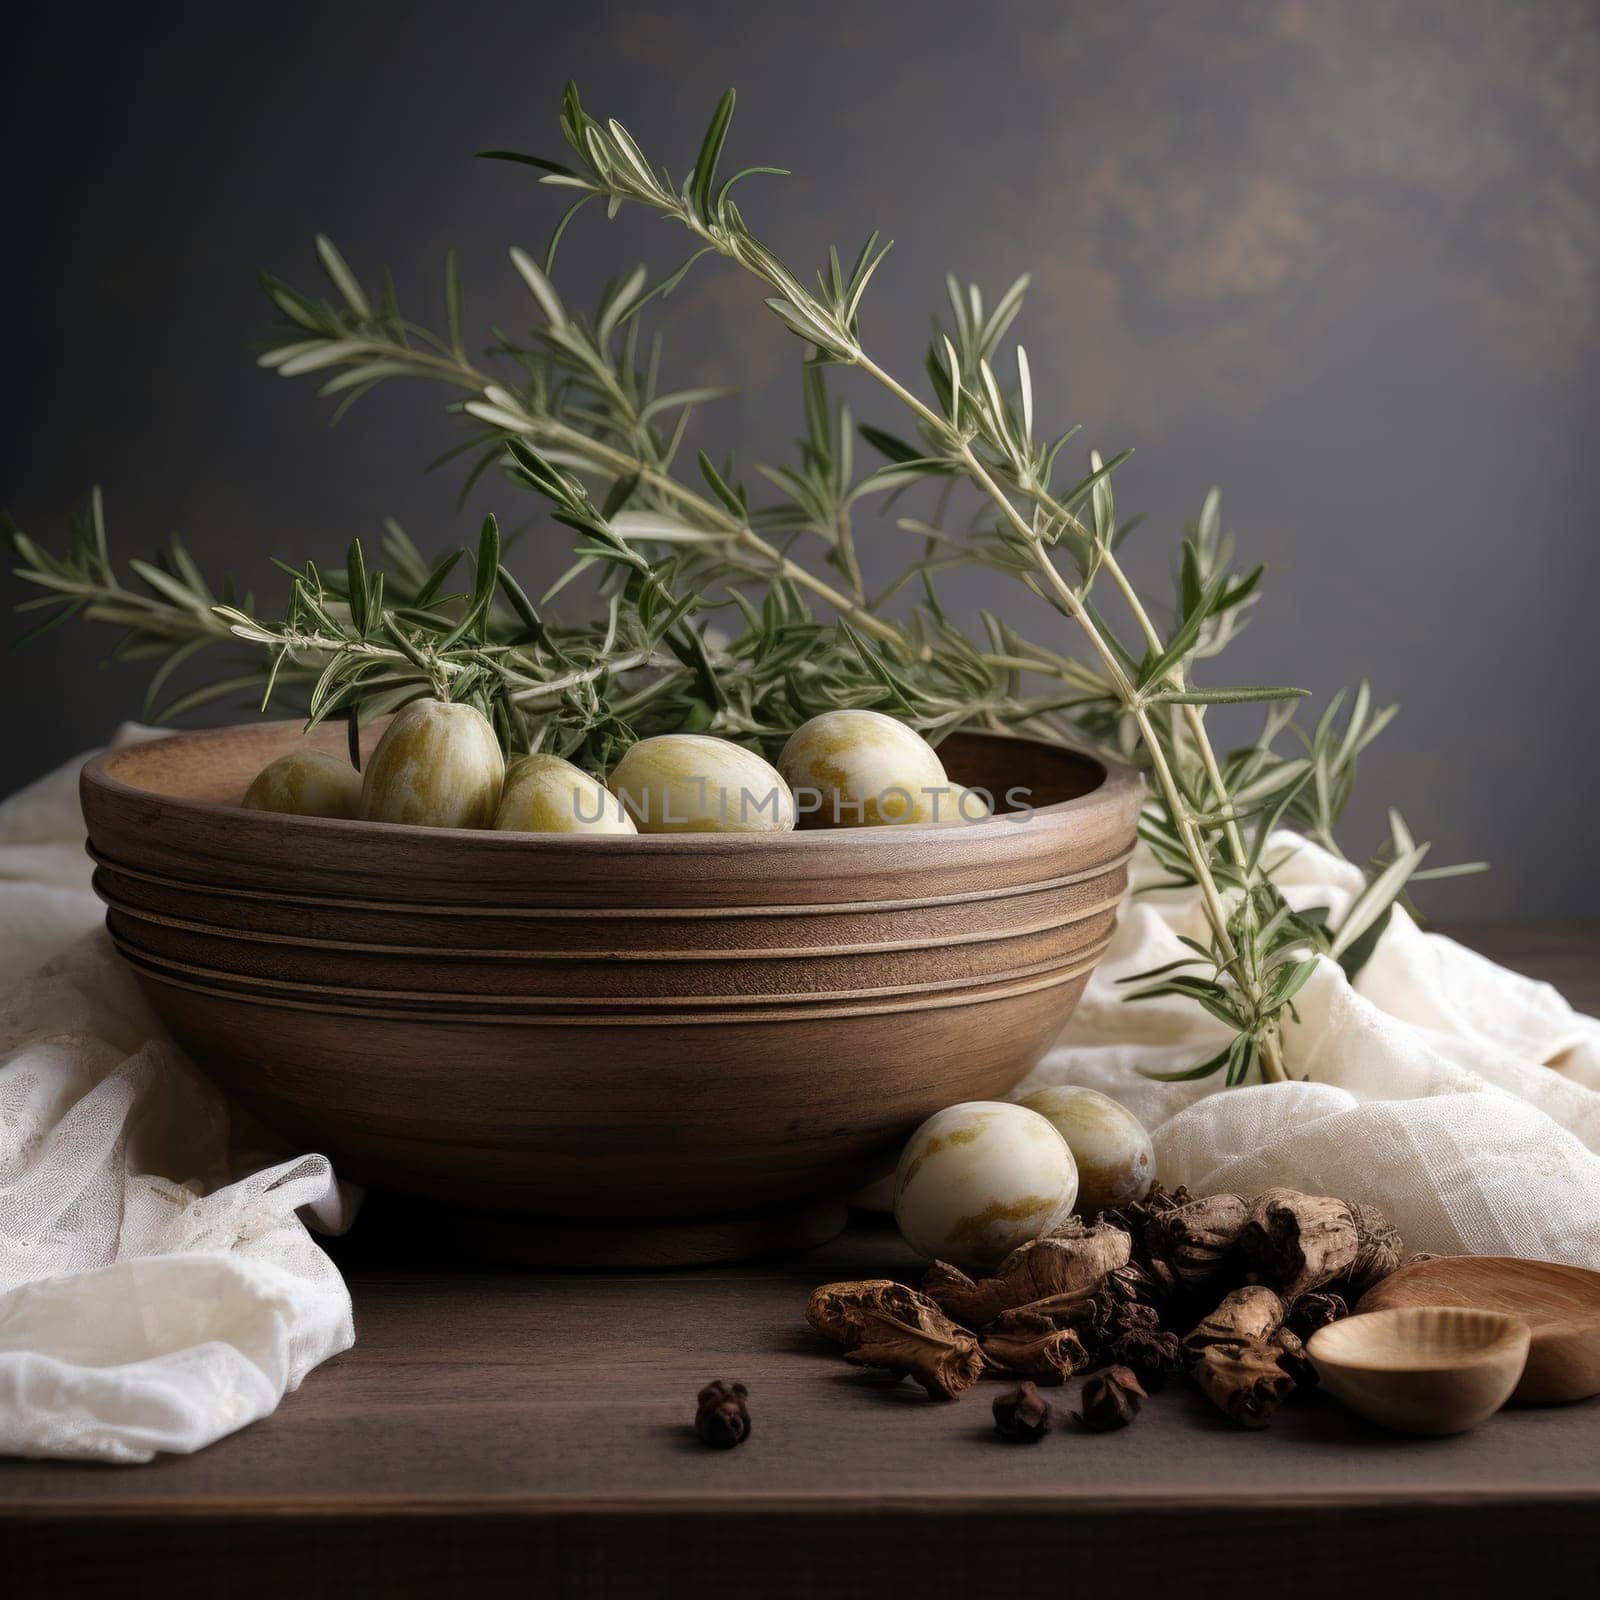 Bowl of Olives With Rosemary Sprig by but_photo